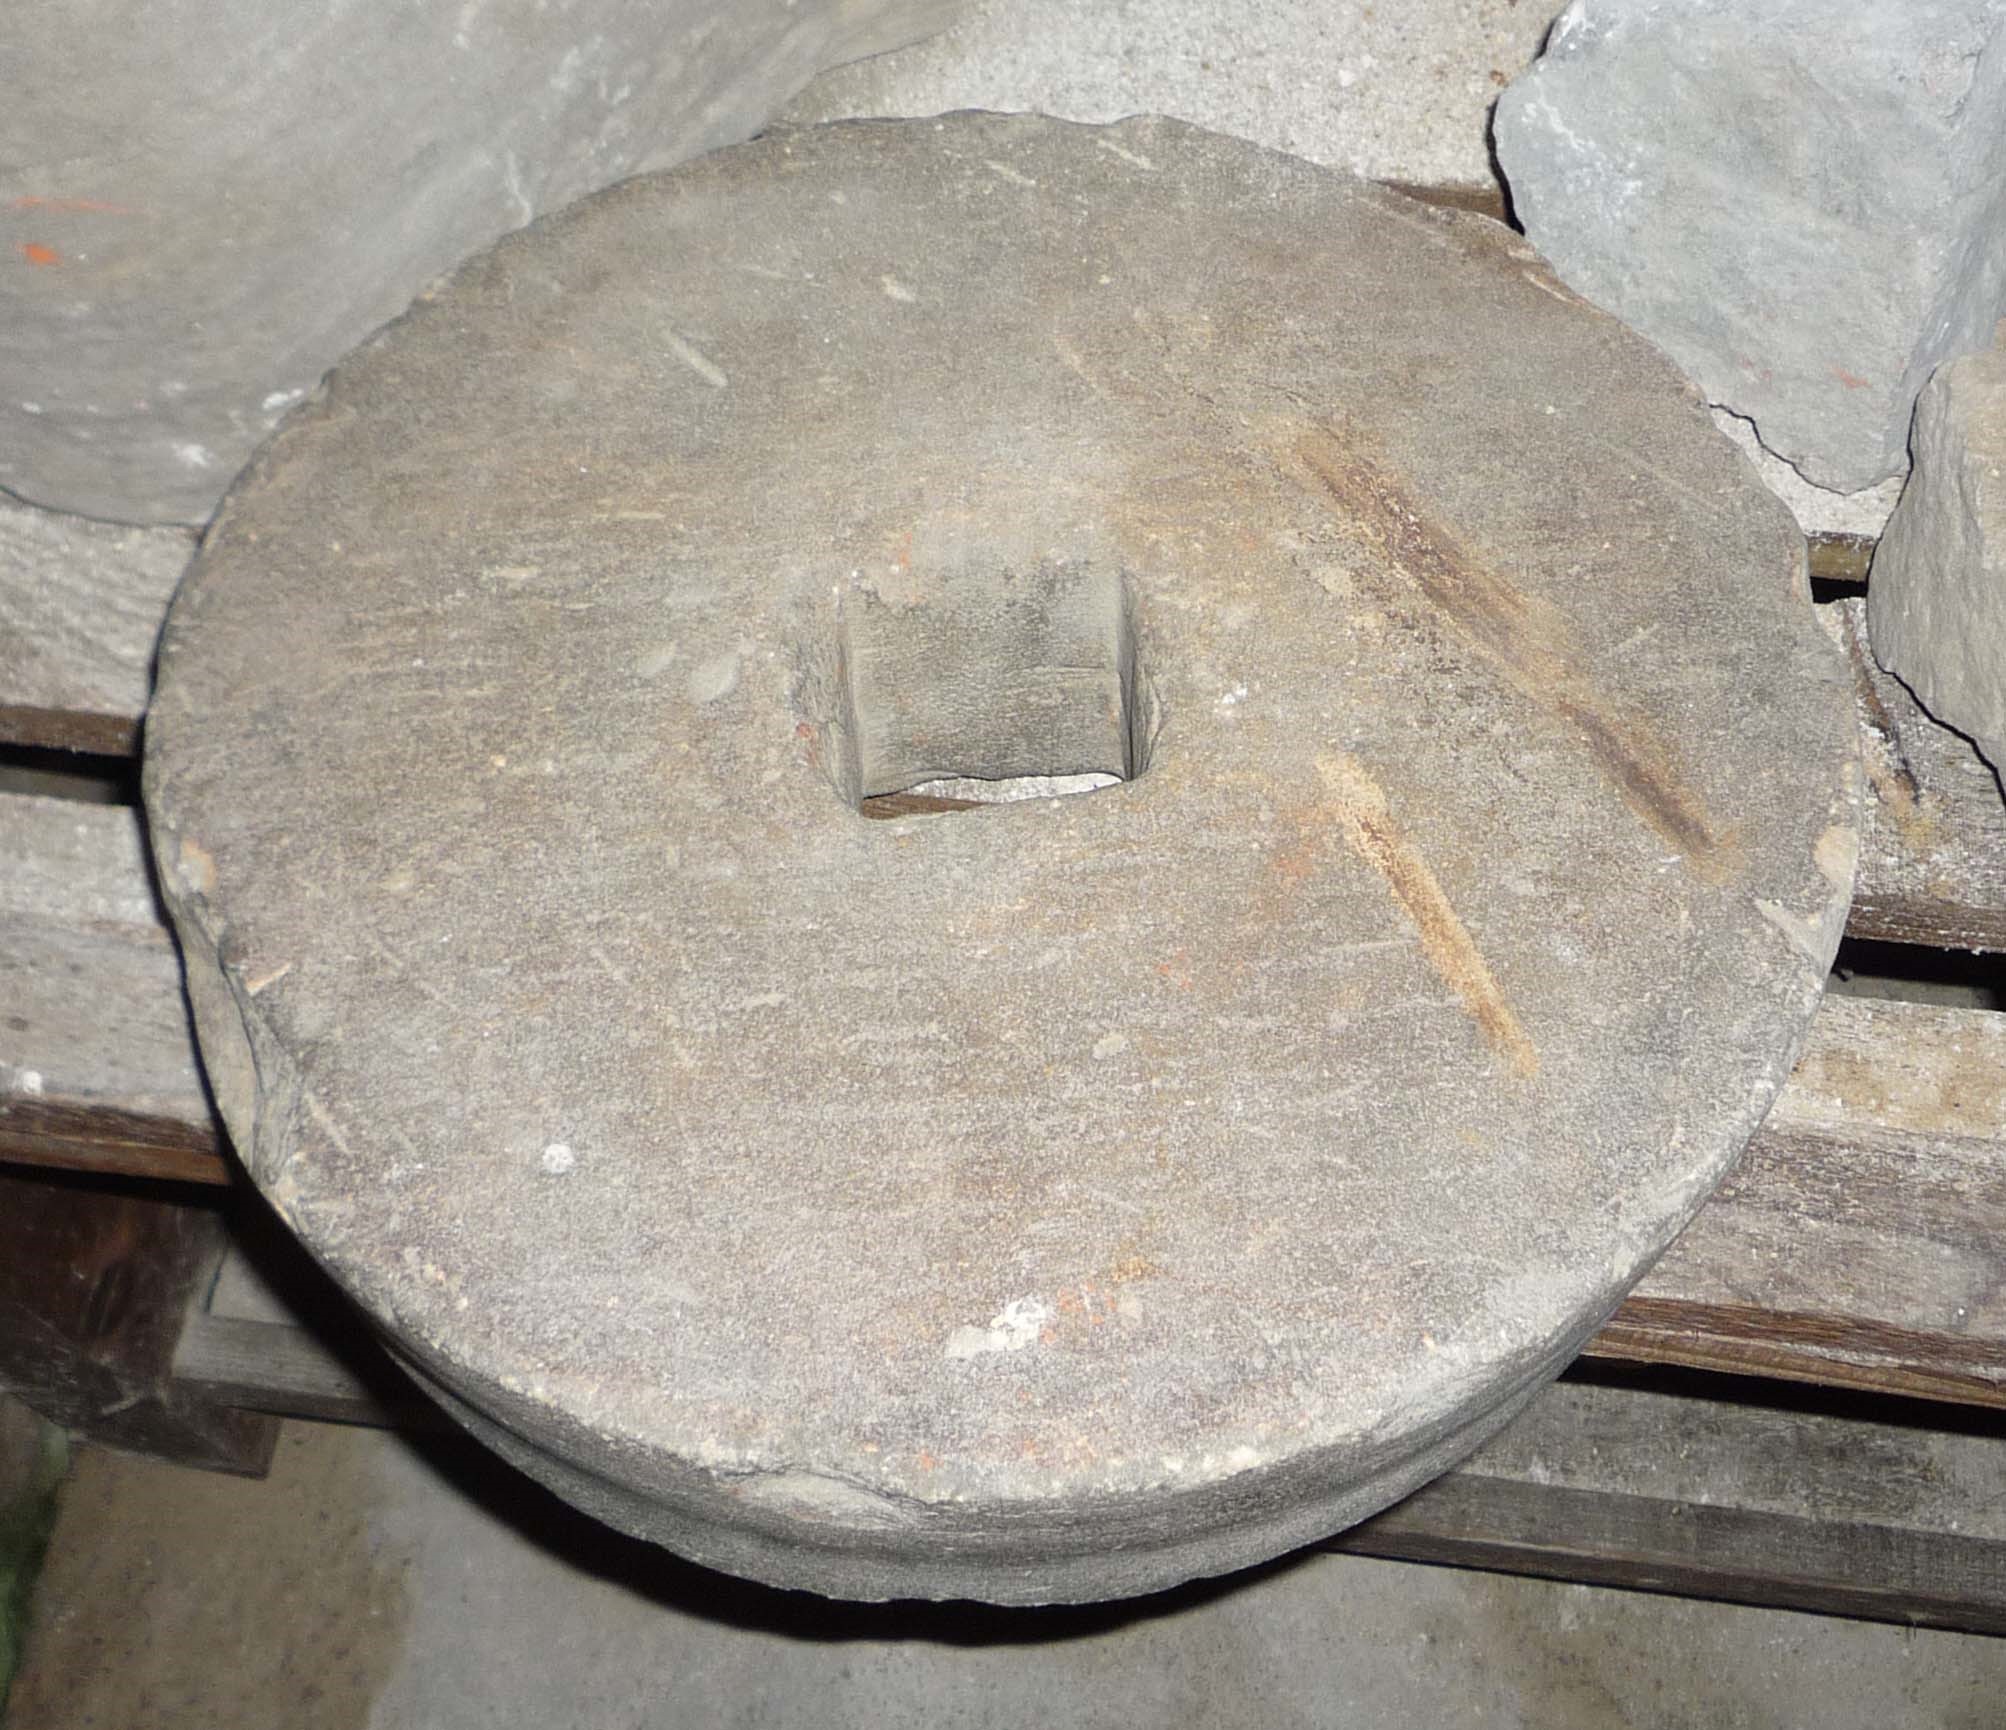 The 500-year-old millstone stolen from Aberdour Castle (Police Scotland)